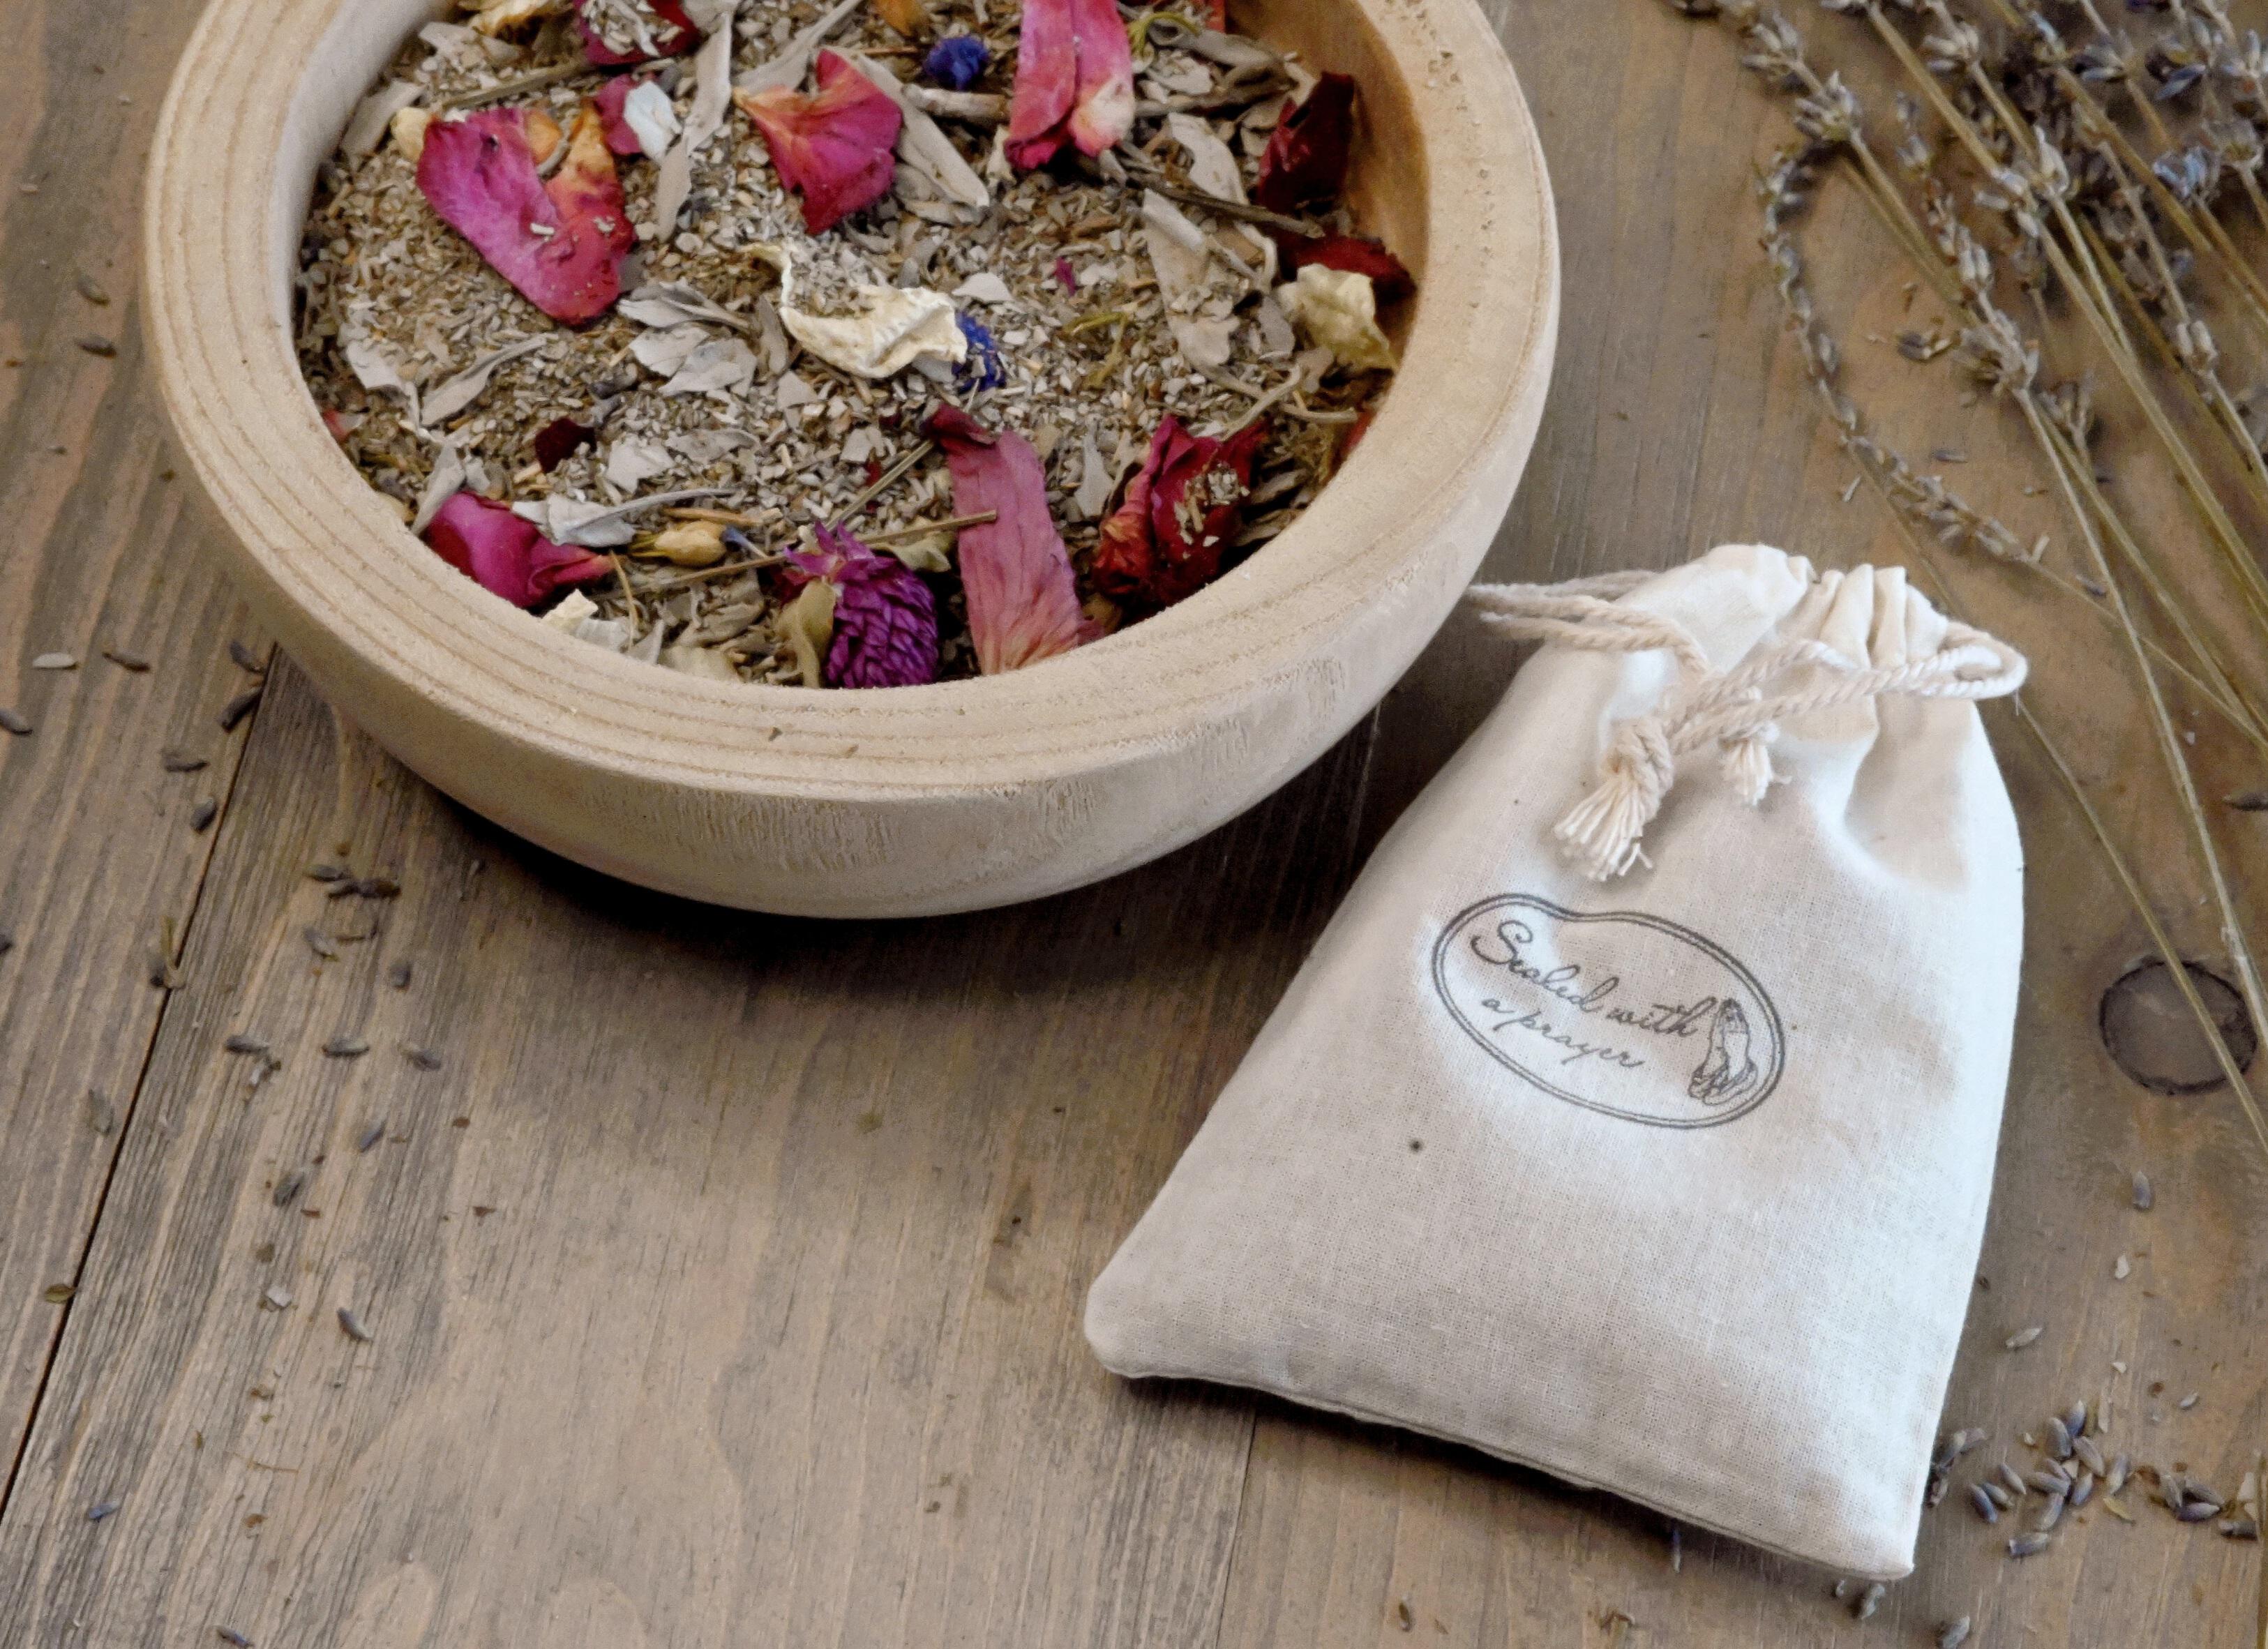 20g Natural Dried Flowers Herbs Kit For Soap Making, DIY Candle Making,  Bath - Include Rose Petals, Lavender, Don't Forget Me, Lilium, Jasmine,  Rosebuds And More - Halloween Thanksgiving Christmas Decor, Room